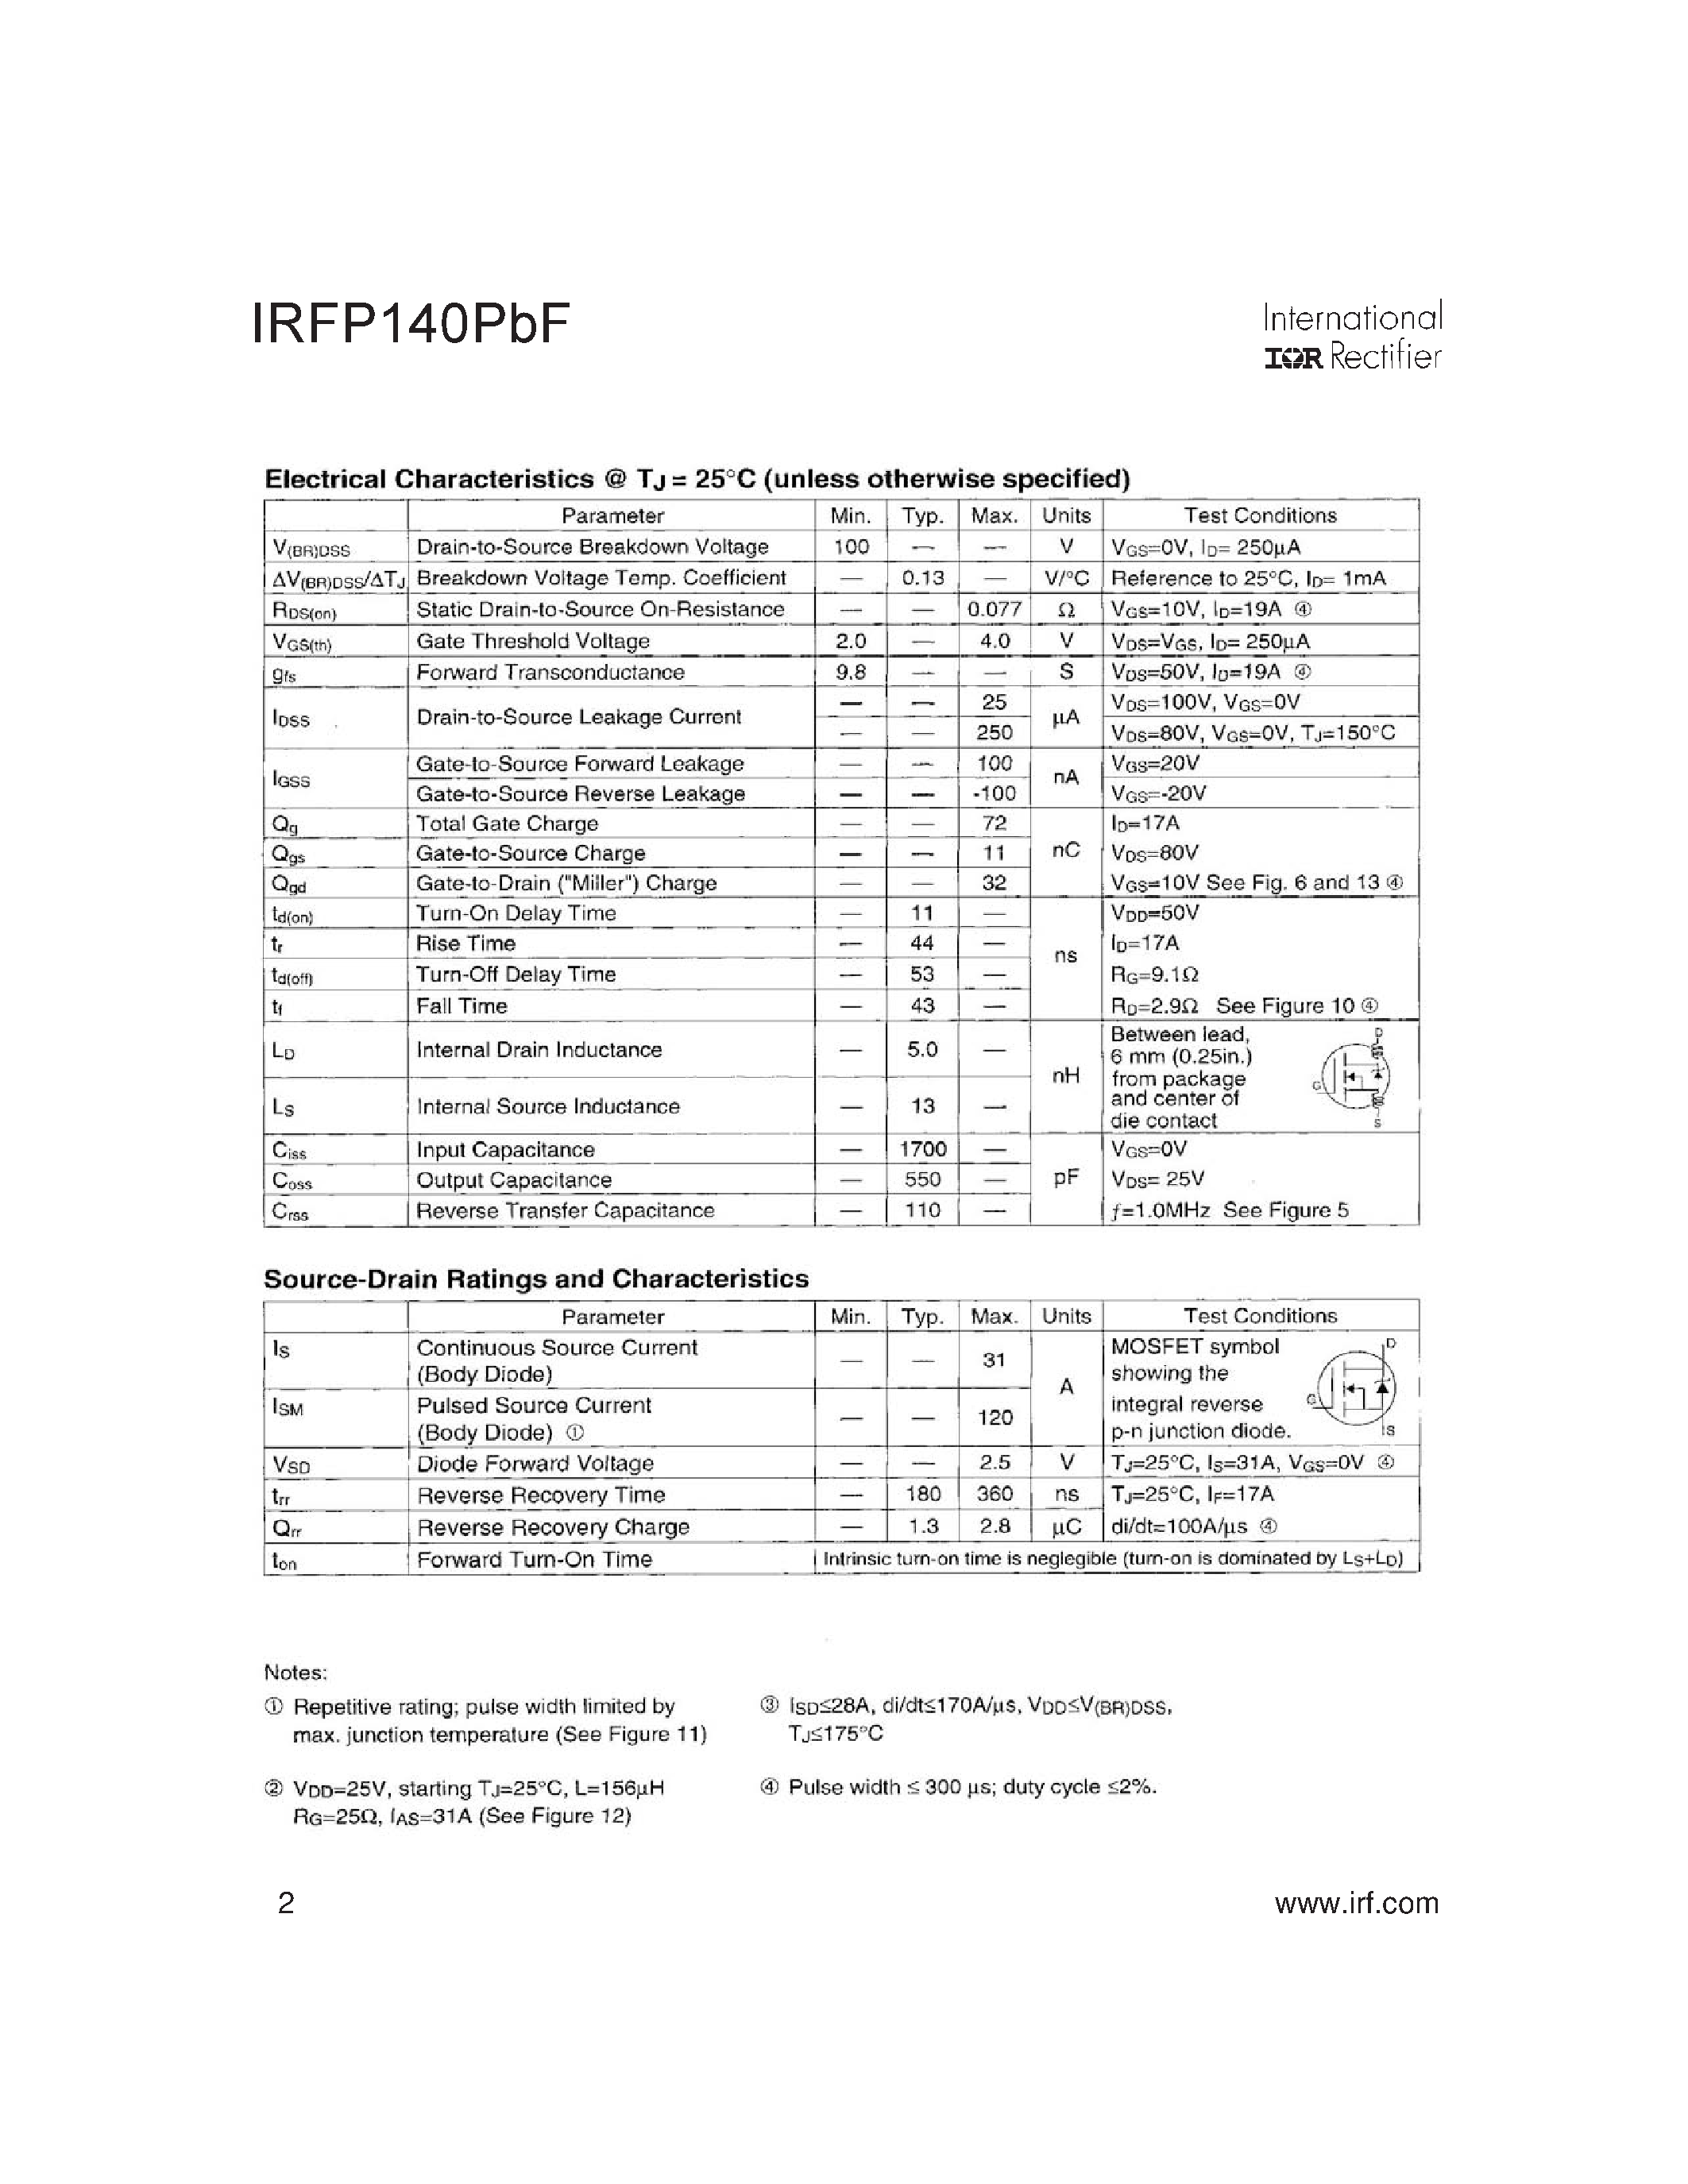 Datasheet IRFP140PBF - Preferred for commercail-industrial applications page 2